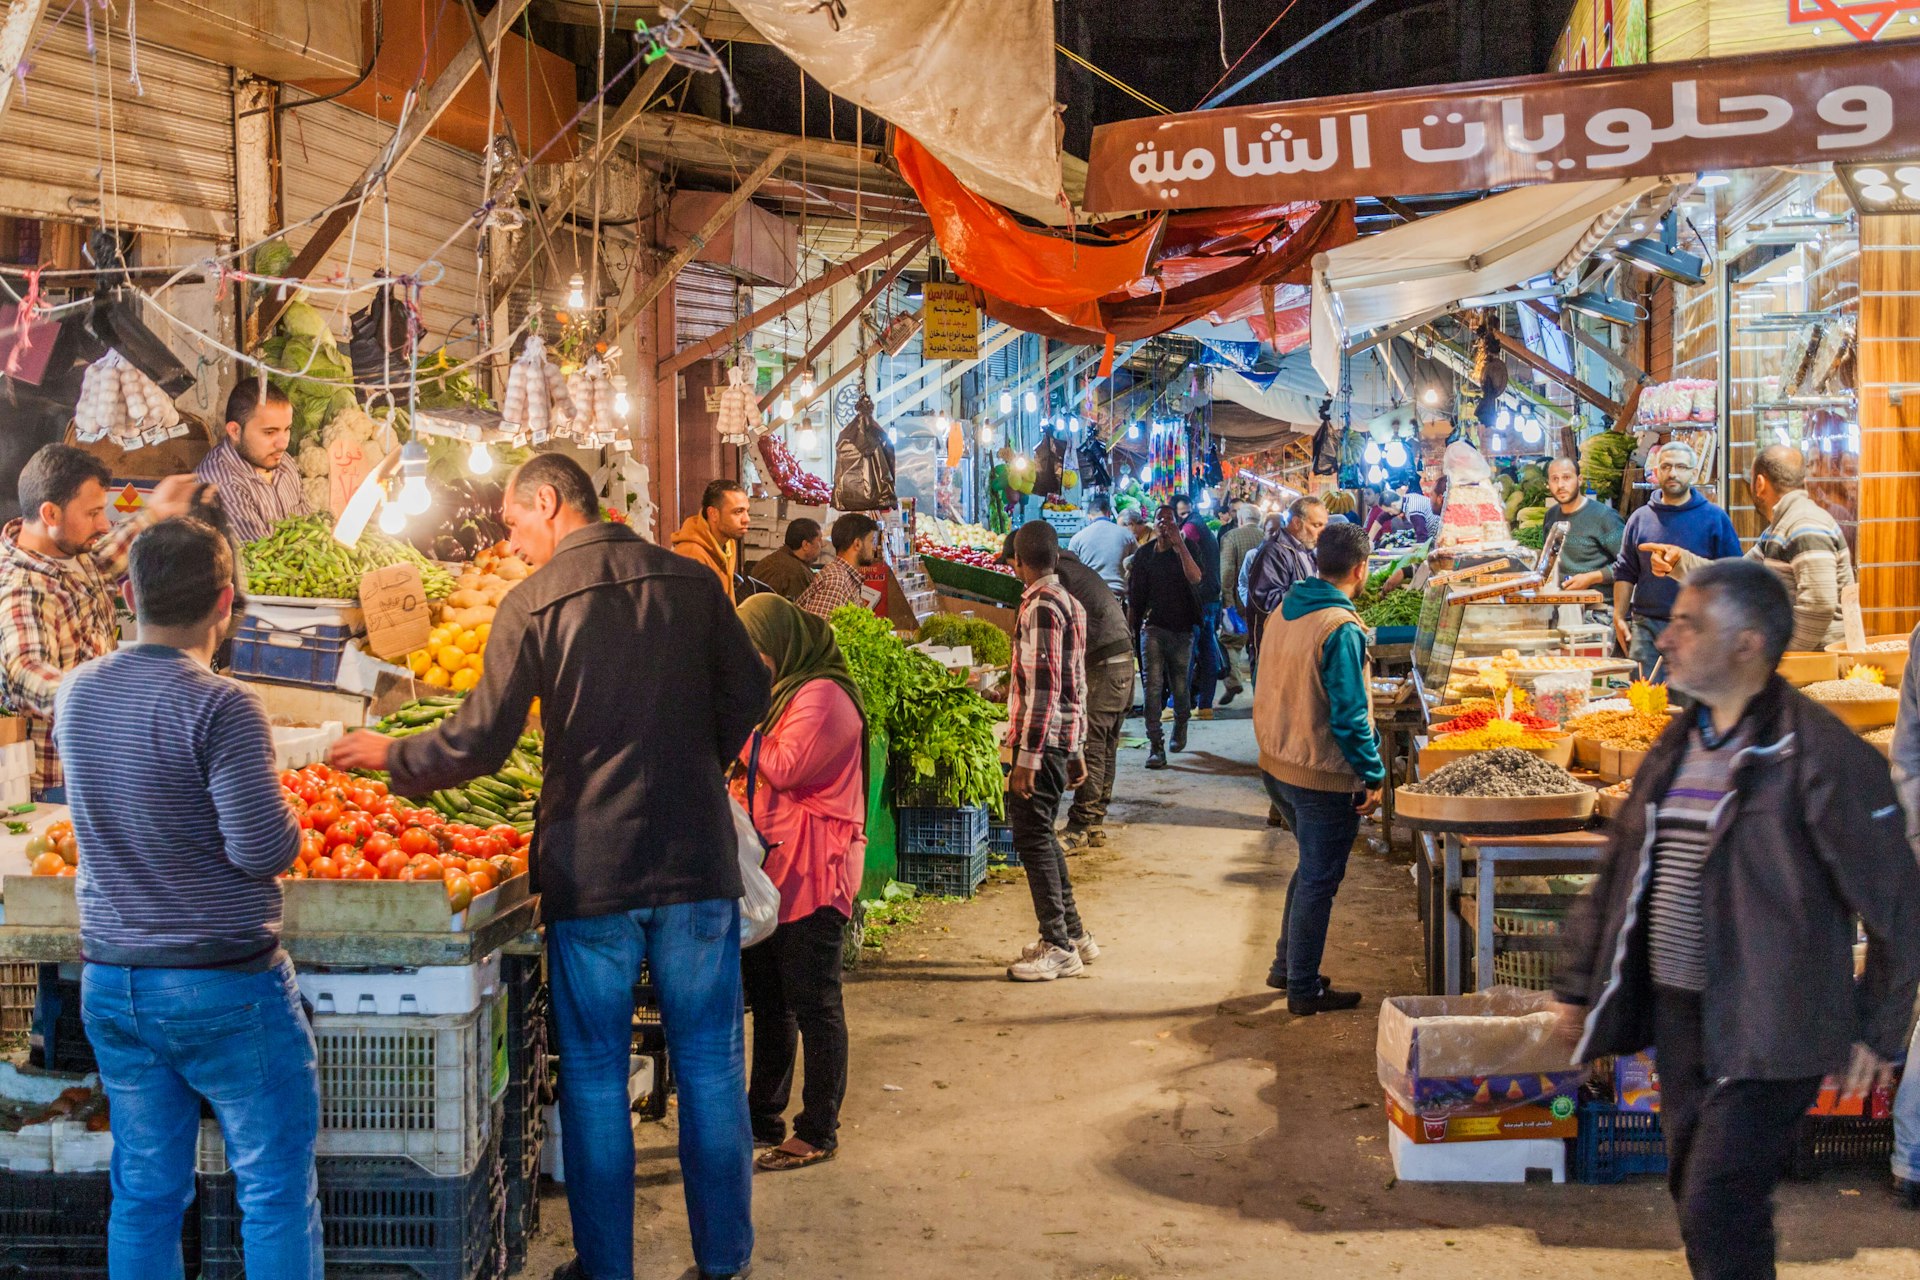 People shopping at a fruit and vegetable market in Amman, Jordan